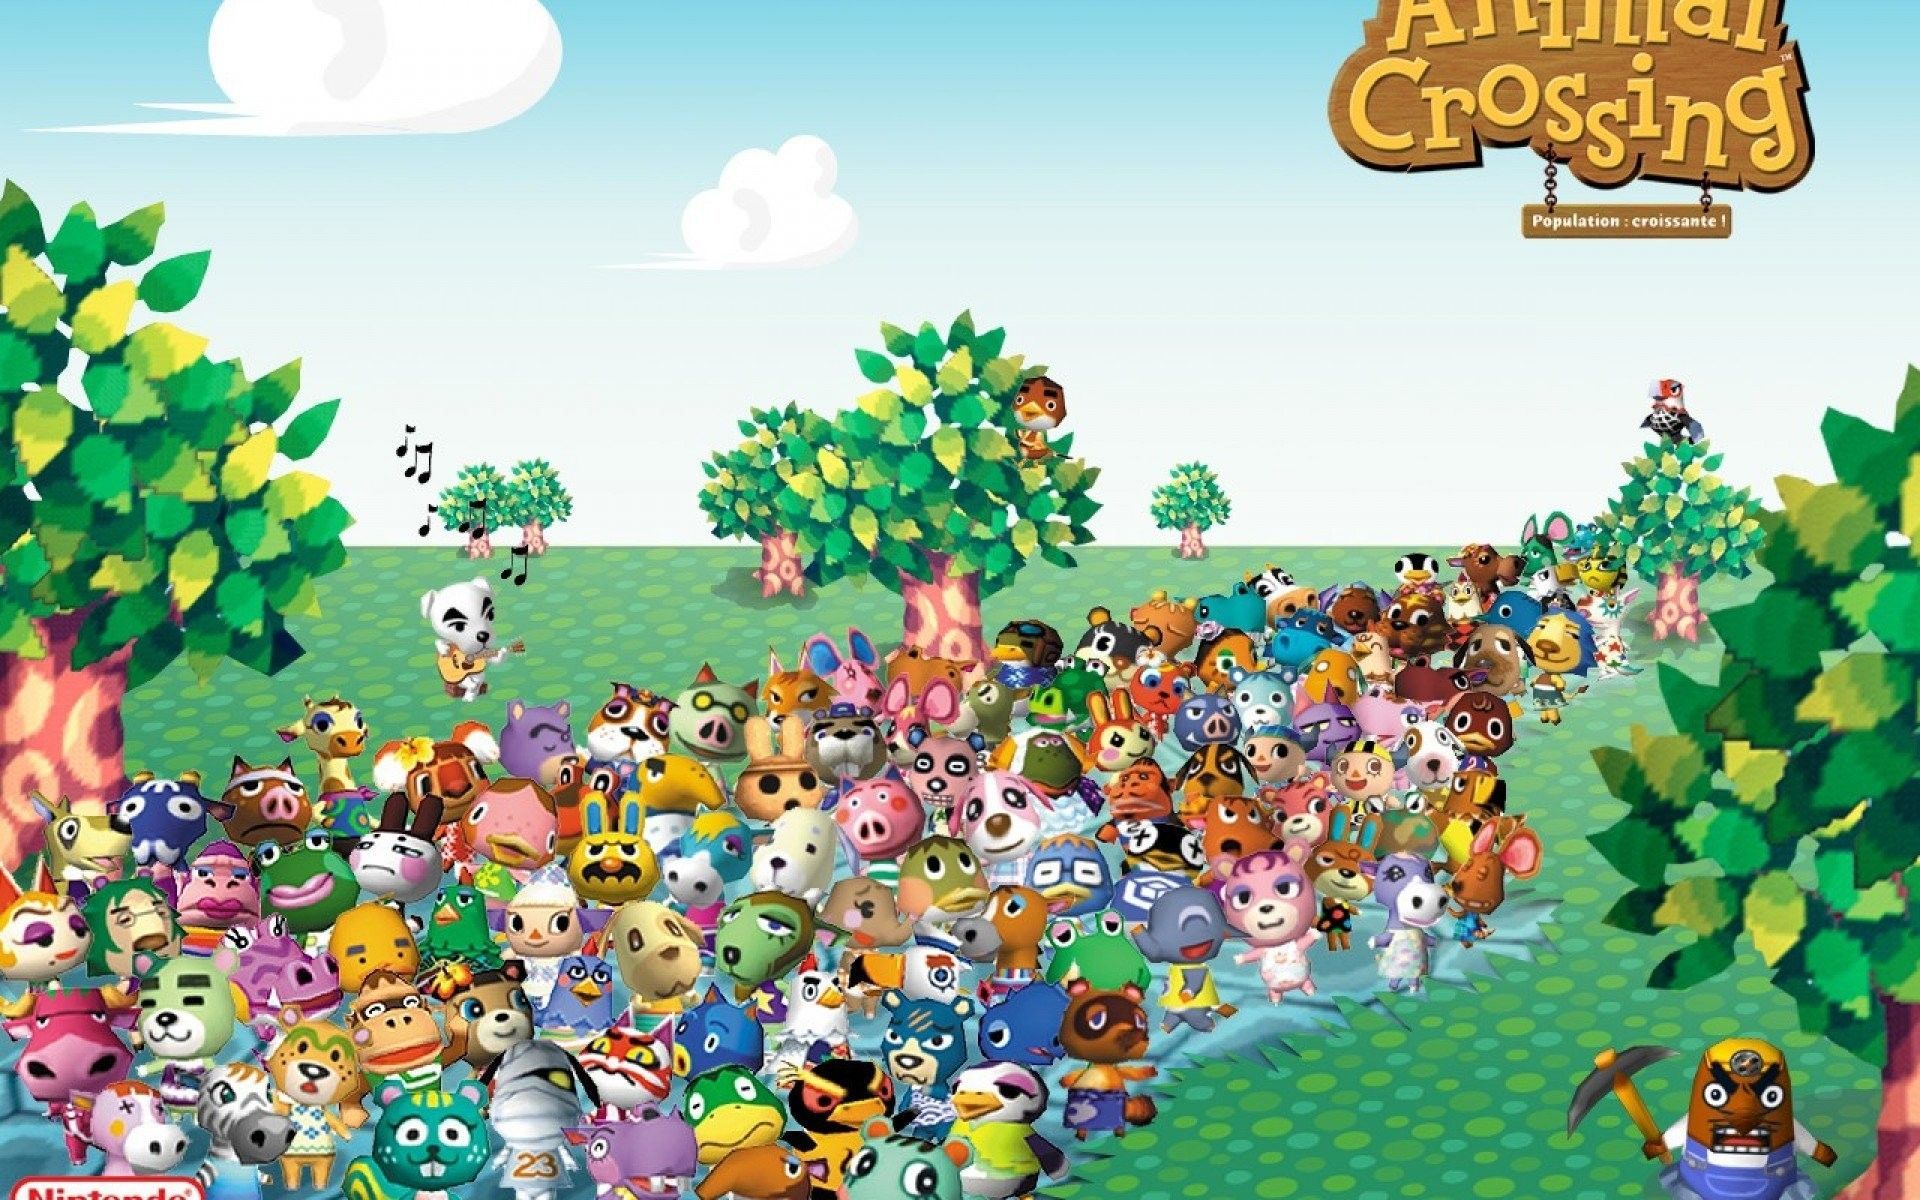 An animal crossing game with many characters - Nintendo